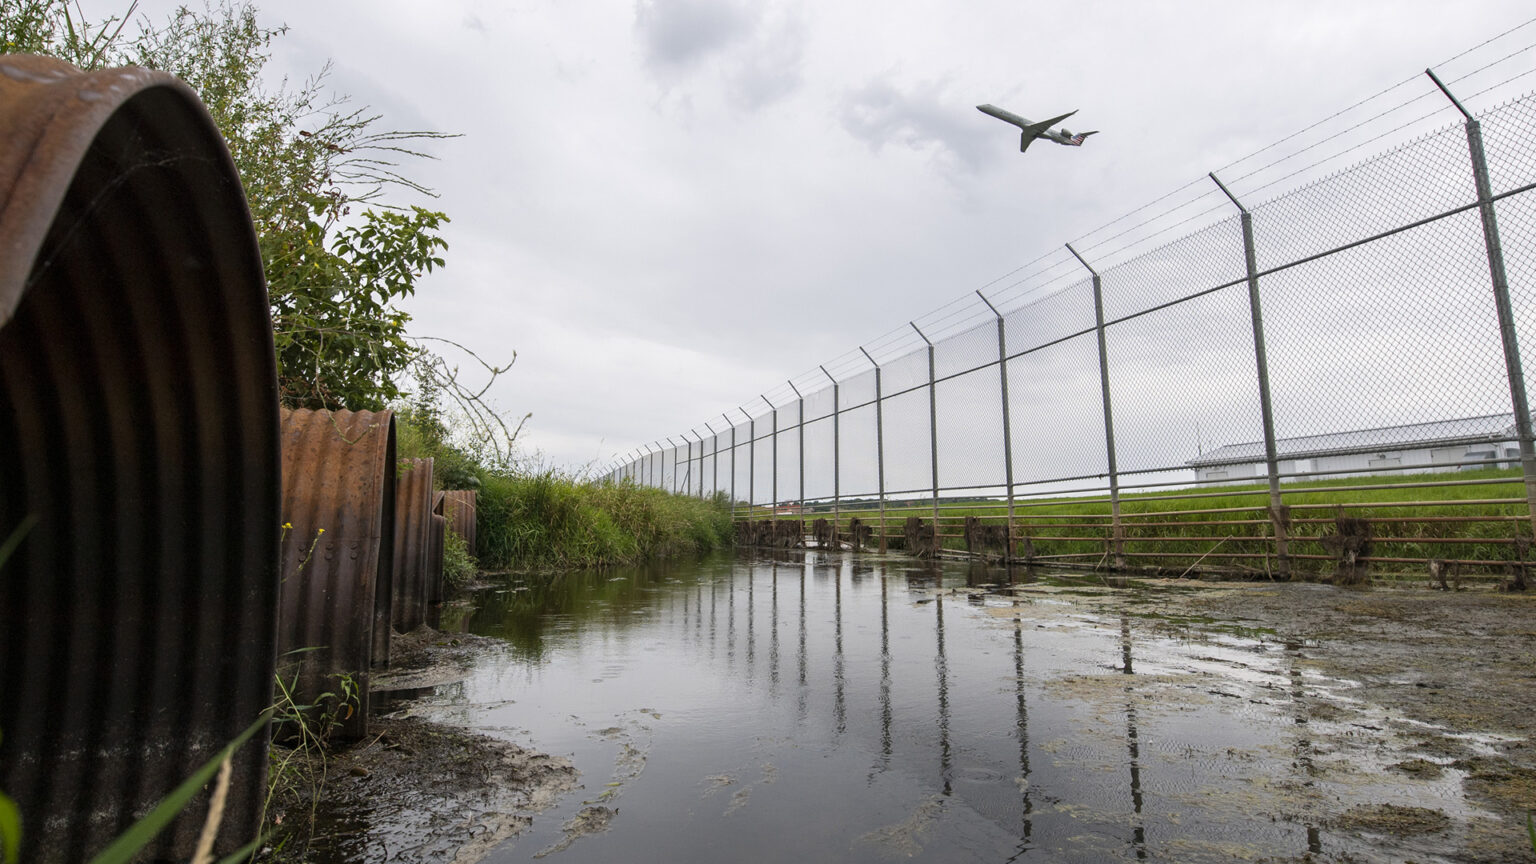 An airplane ascends over a chain-linked fence topped with barbed wire that faces a wetland area with rusty culvert mouths.